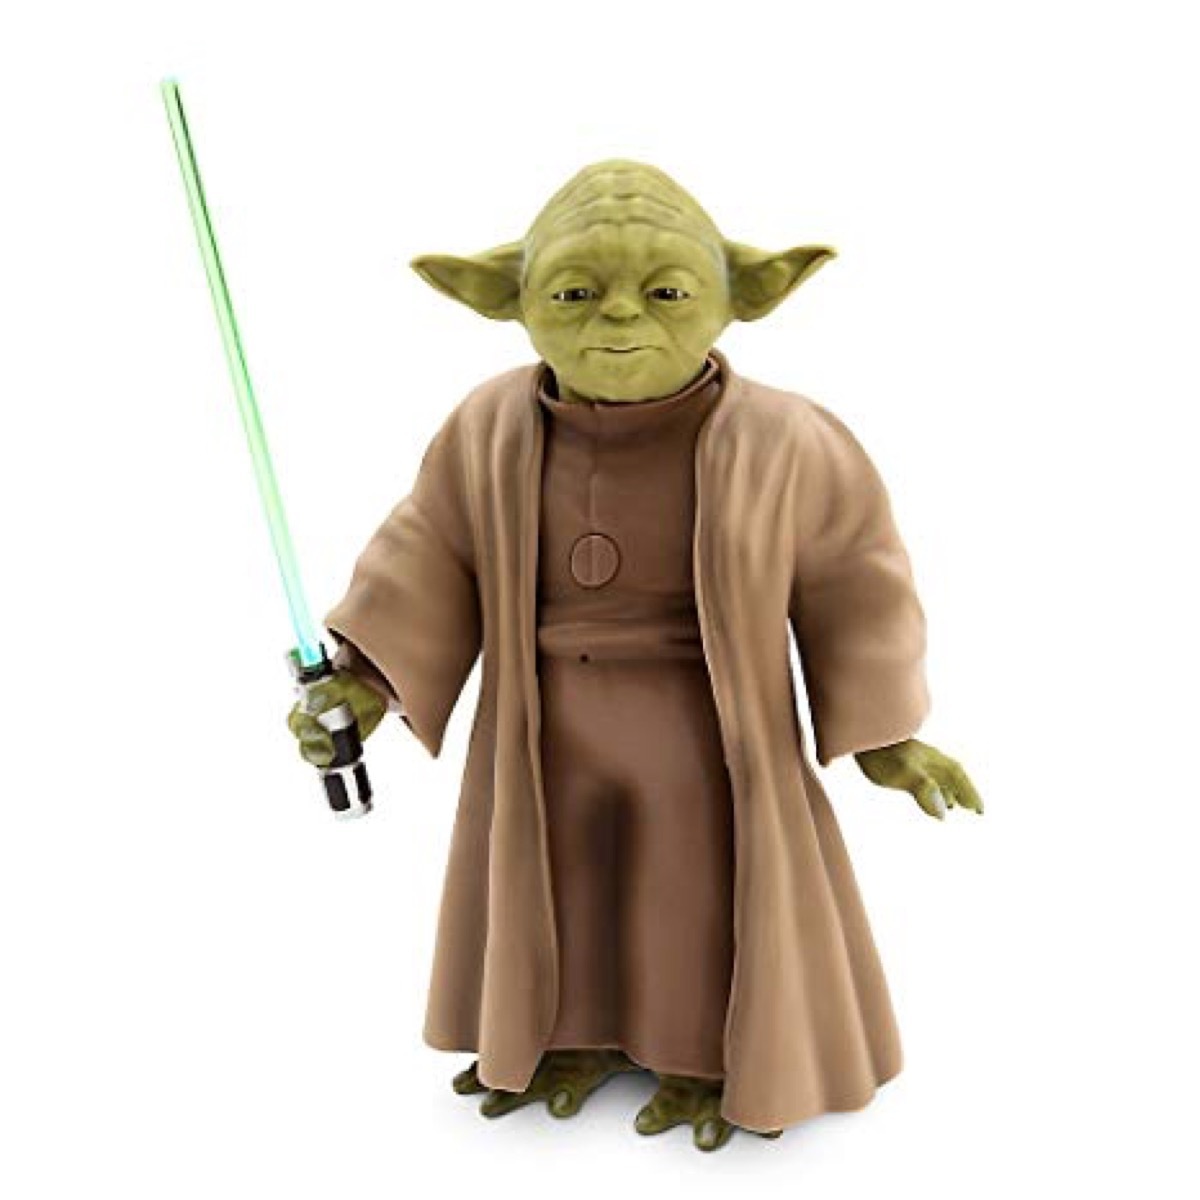 Yoda doll with lightsaber